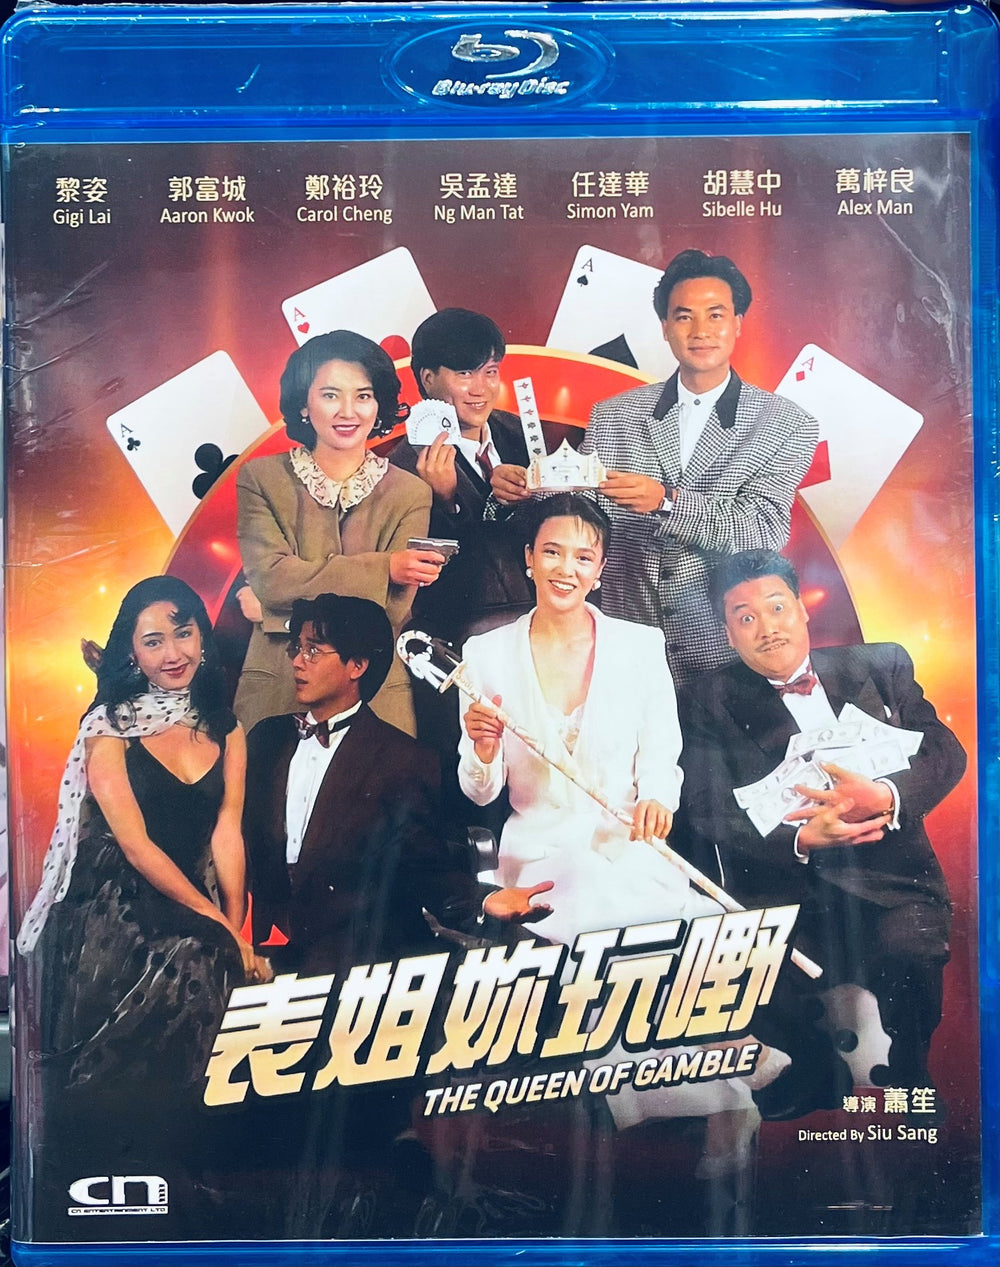 The Queen of Gamble 表姐, 你玩嘢! 1991 (Hong Kong Movie) BLU-RAY with English Sub (Region A)